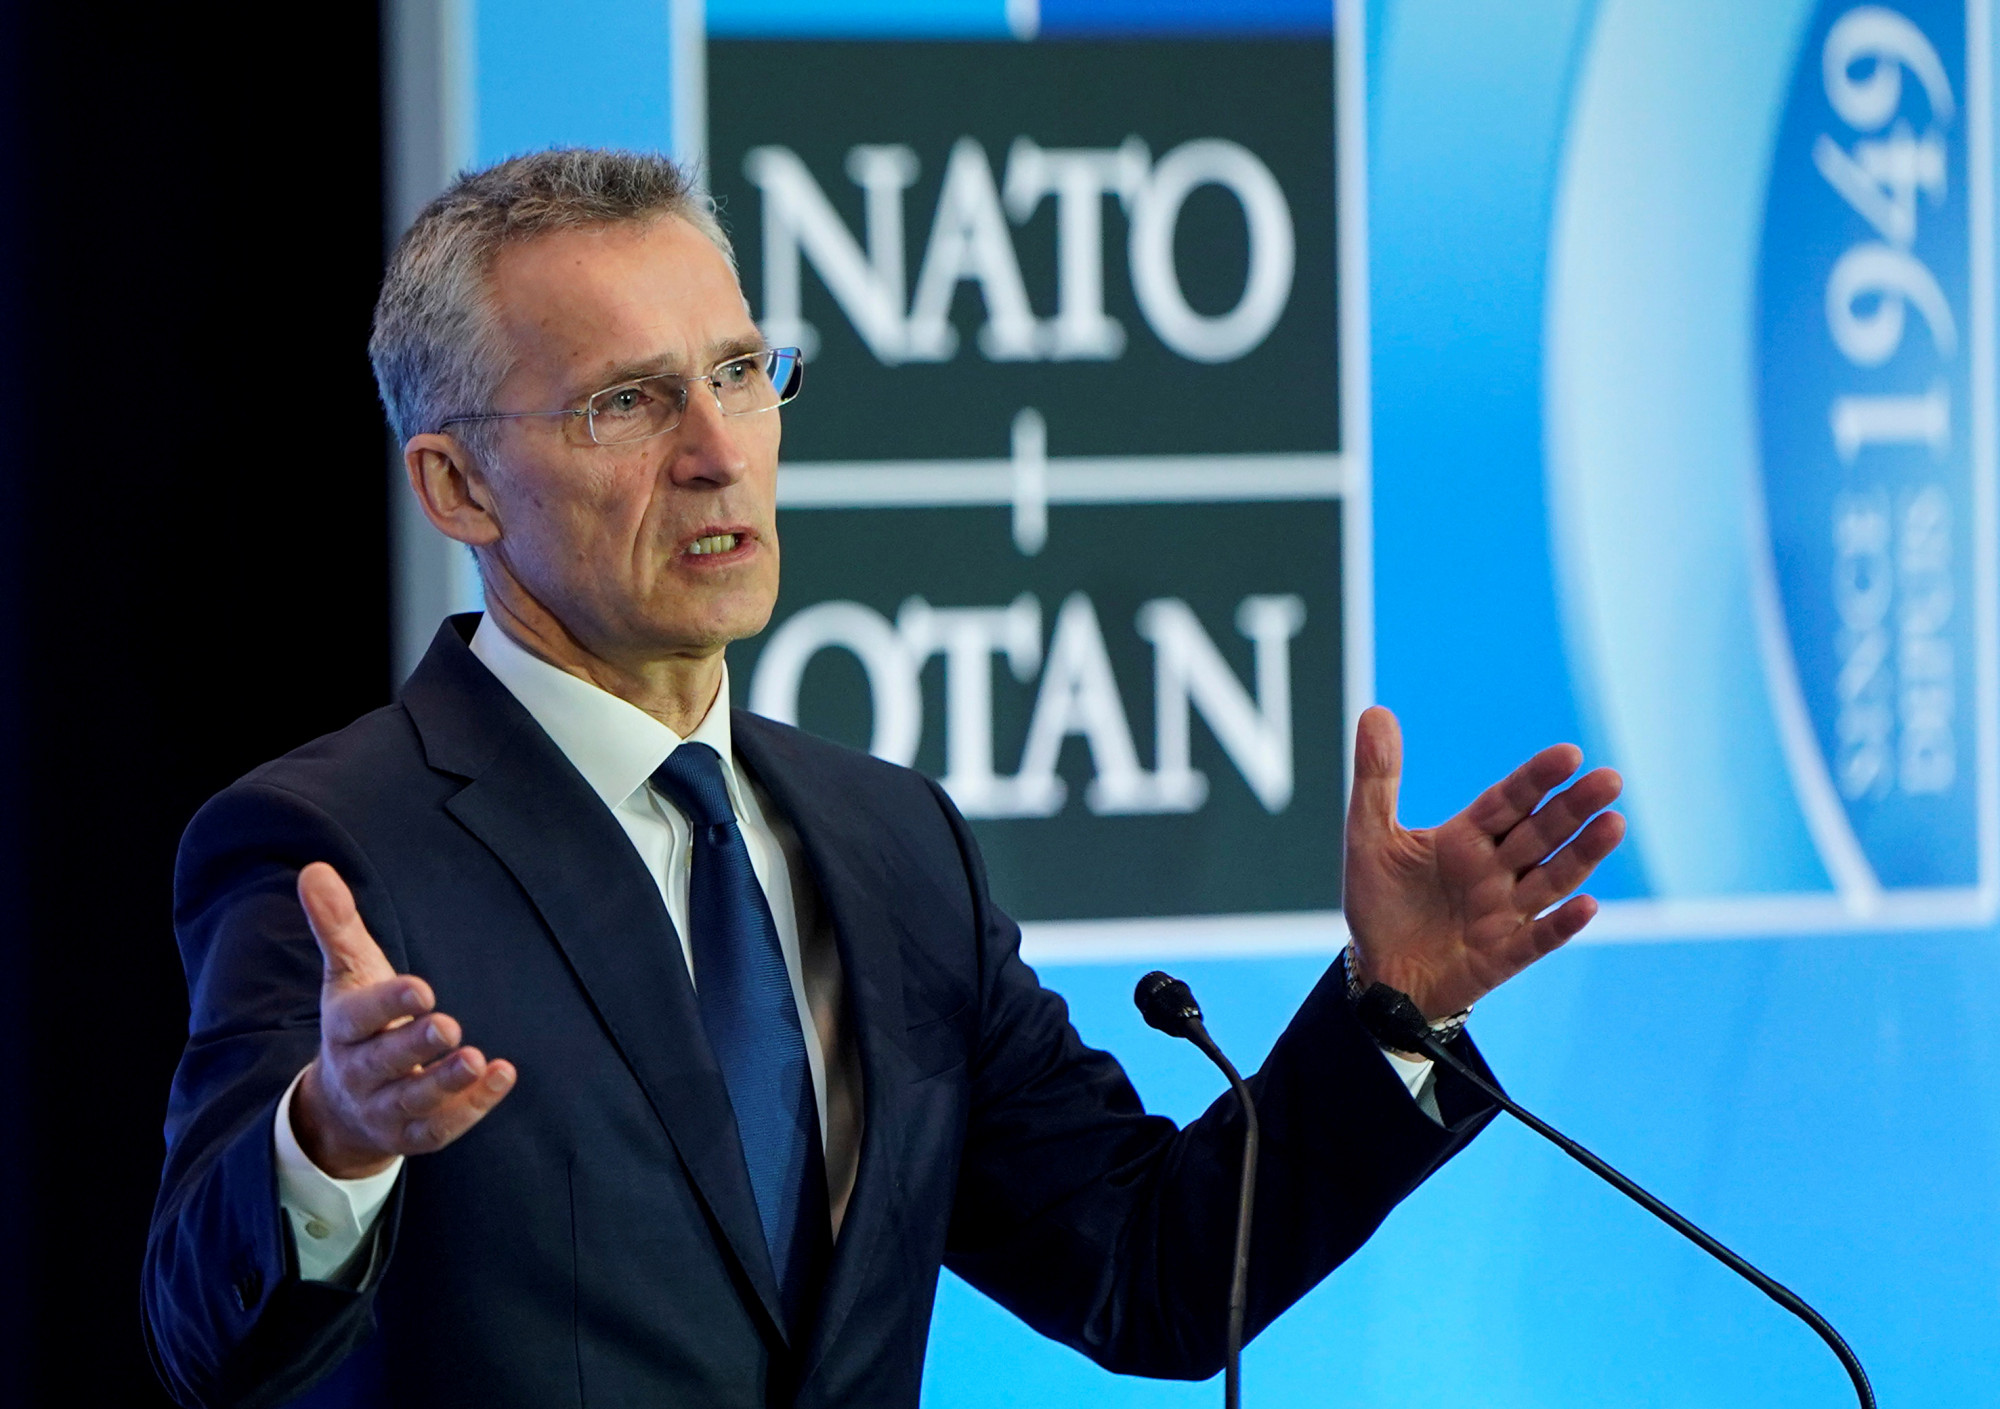 LIVE: NATO Secretary General Holds Briefing on Afghanistan